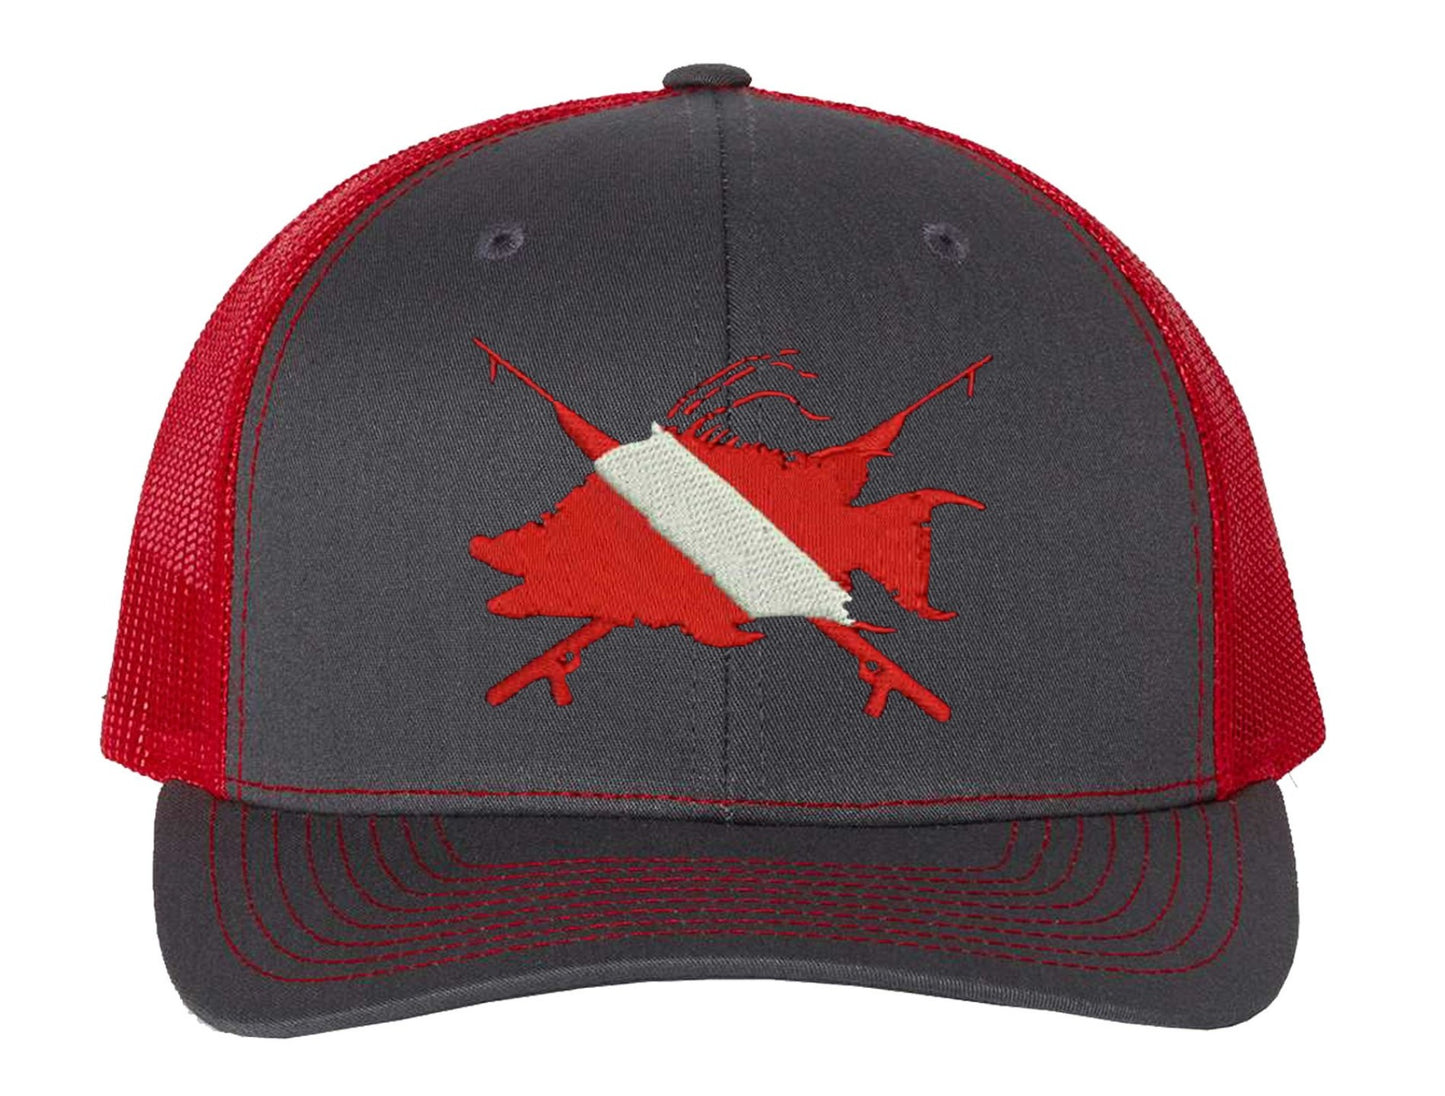 Hogfish Dive Spears Structured Charcoal/Red Trucker Hat